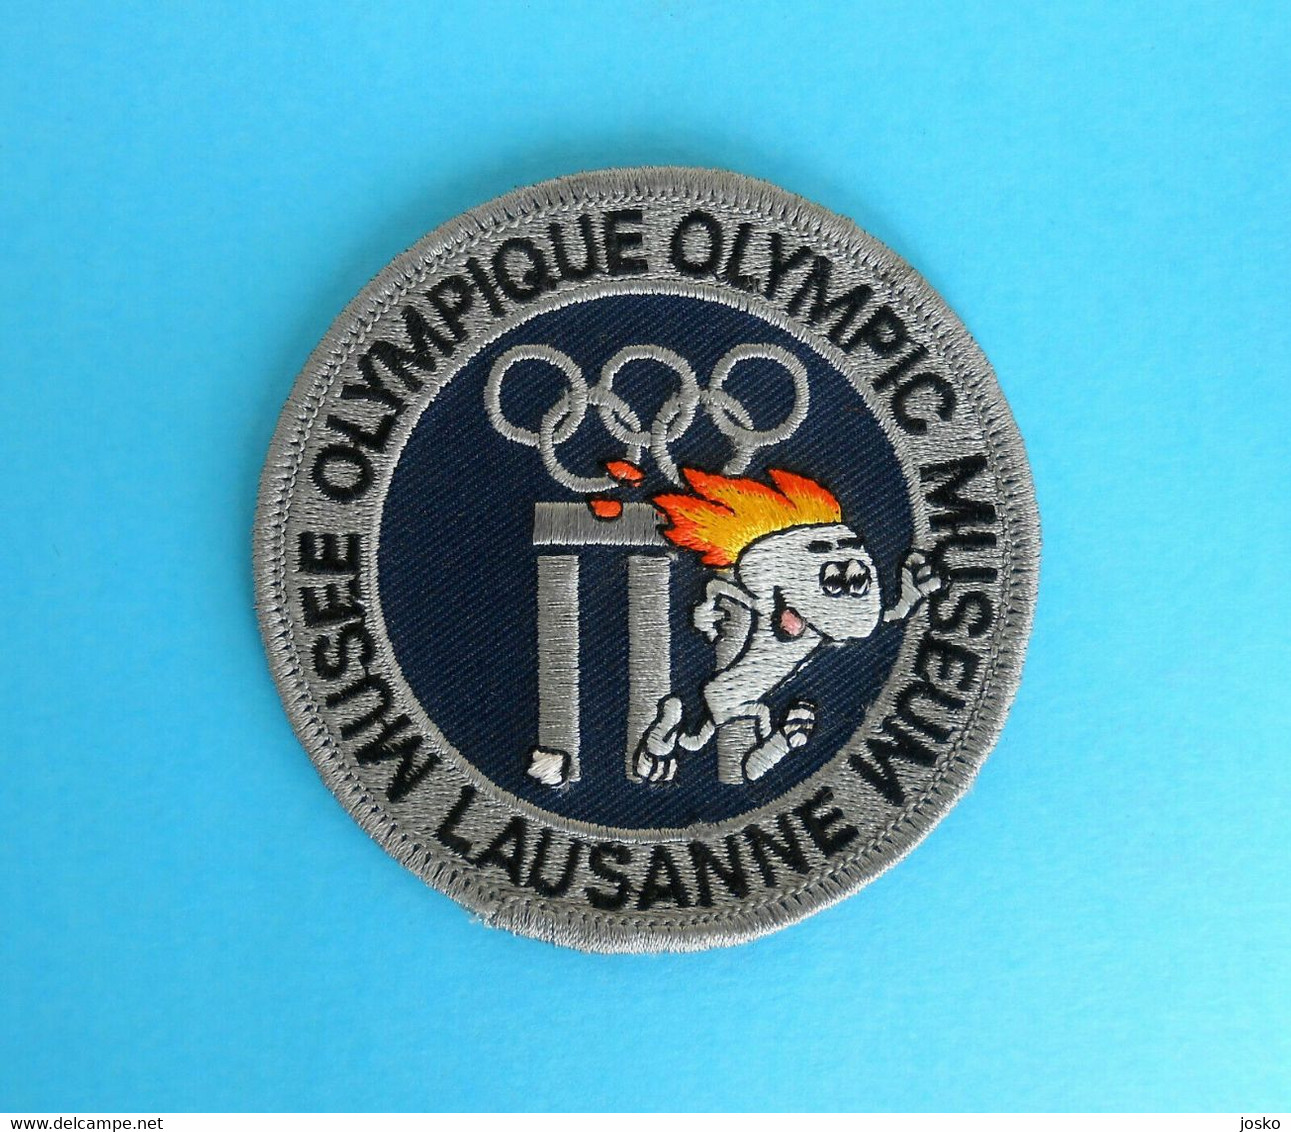 OLYMPIC MUSEUM LAUSANNE Nice Patch * Olympic Games Olympia Olympiade Olimpische Spiele Giochi Olimpici Juegos Olímpicos - Bekleidung, Souvenirs Und Sonstige